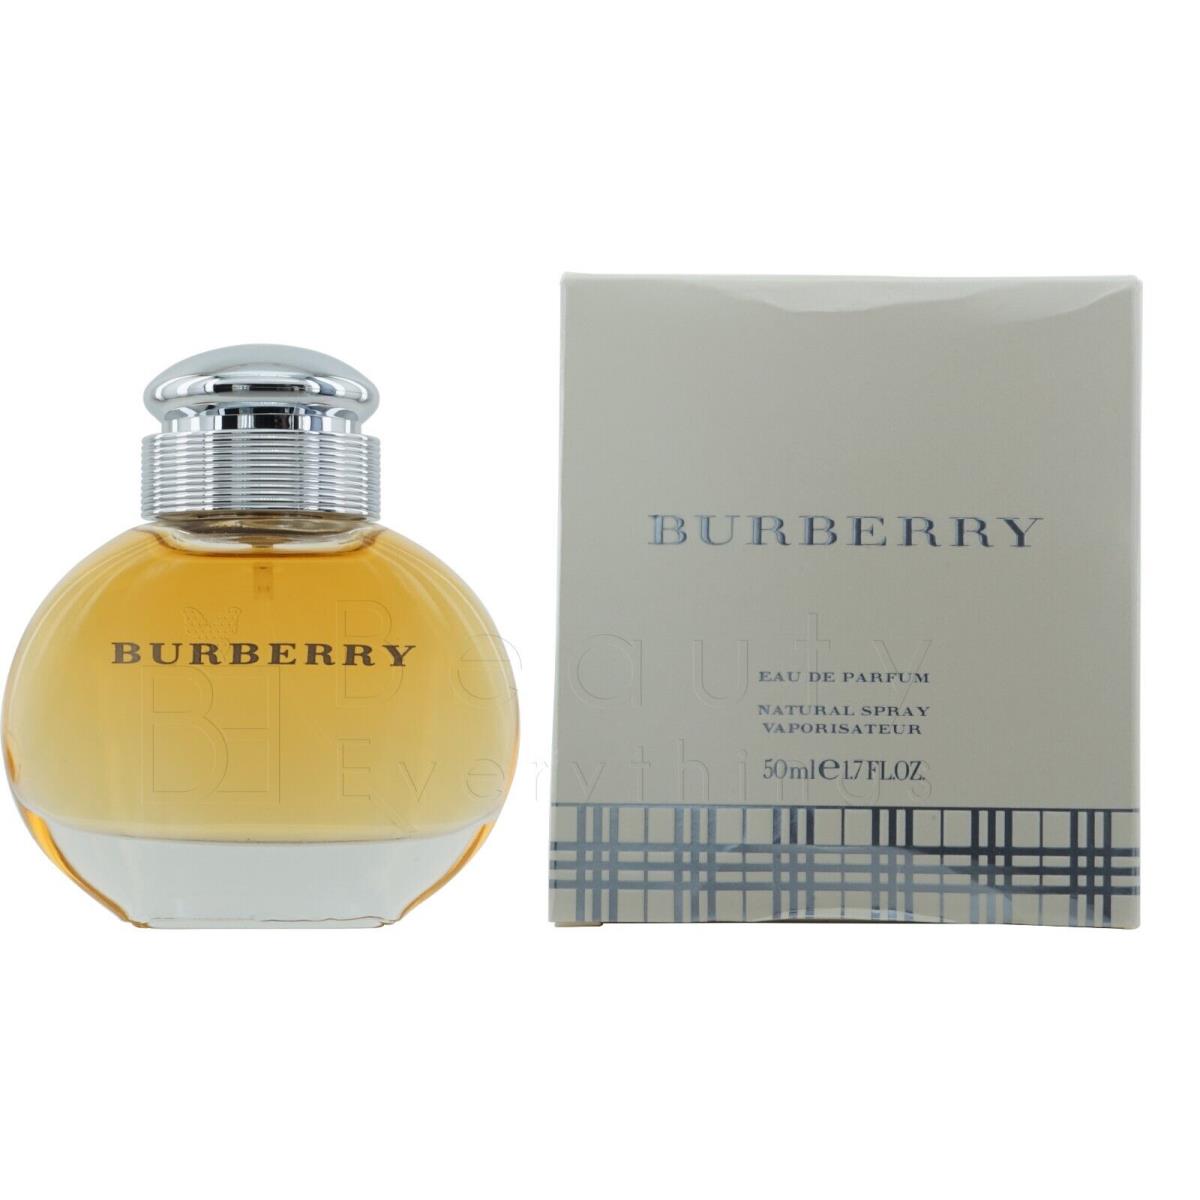 Burberry Classic 1.7oz / 50ml Edp Spray Dented Box For Women Old Packaging